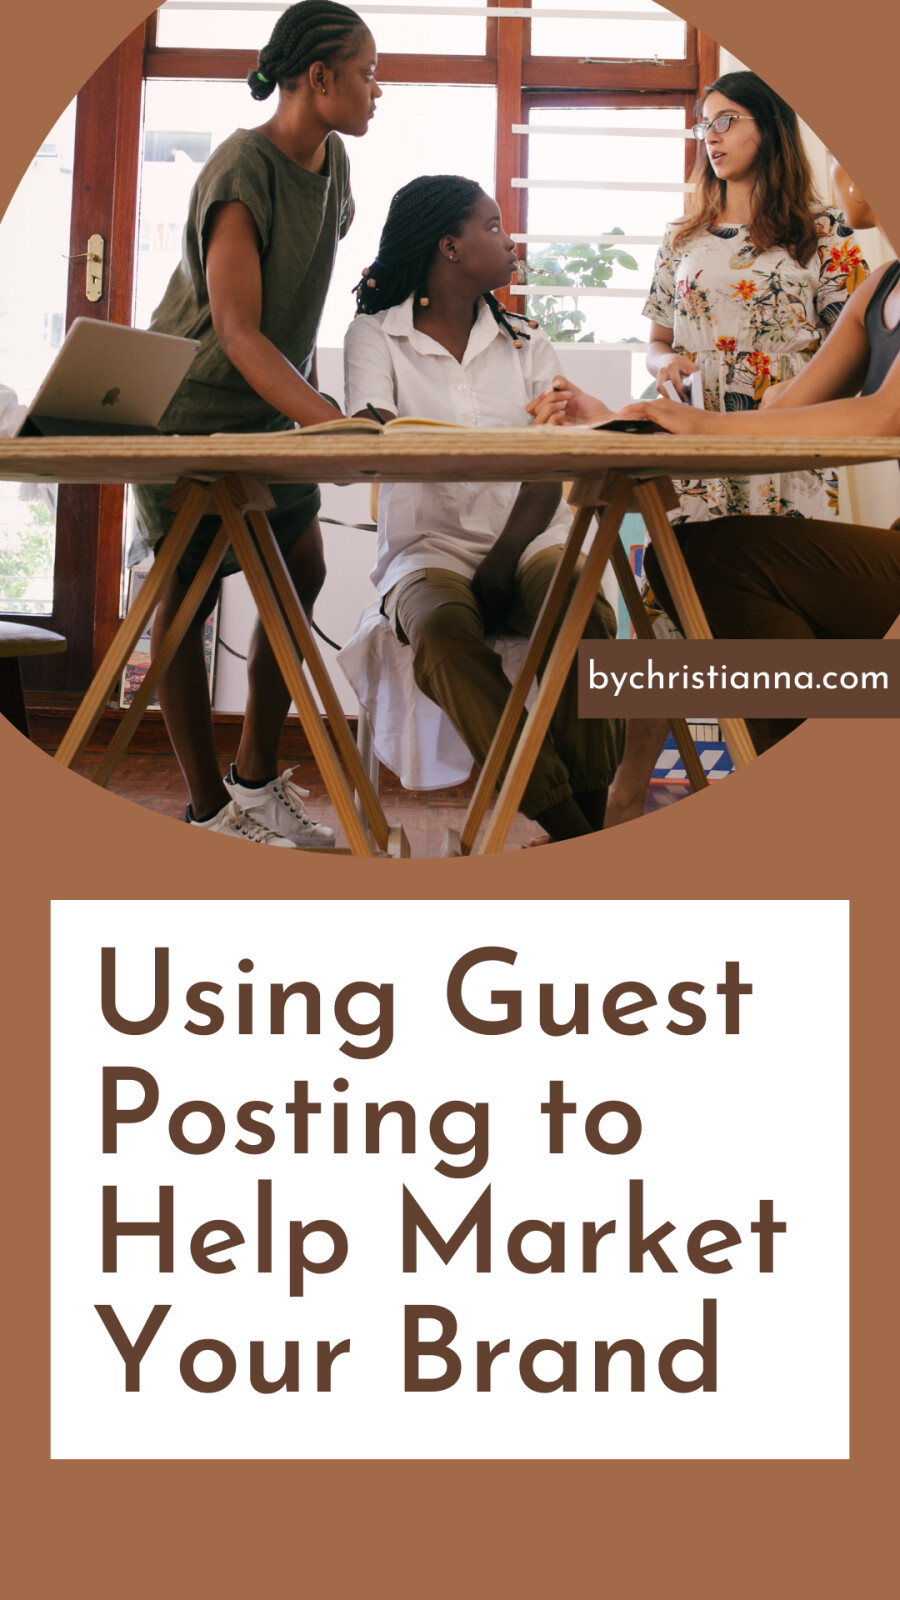 Using Guest Posting to Help Market Your Brand